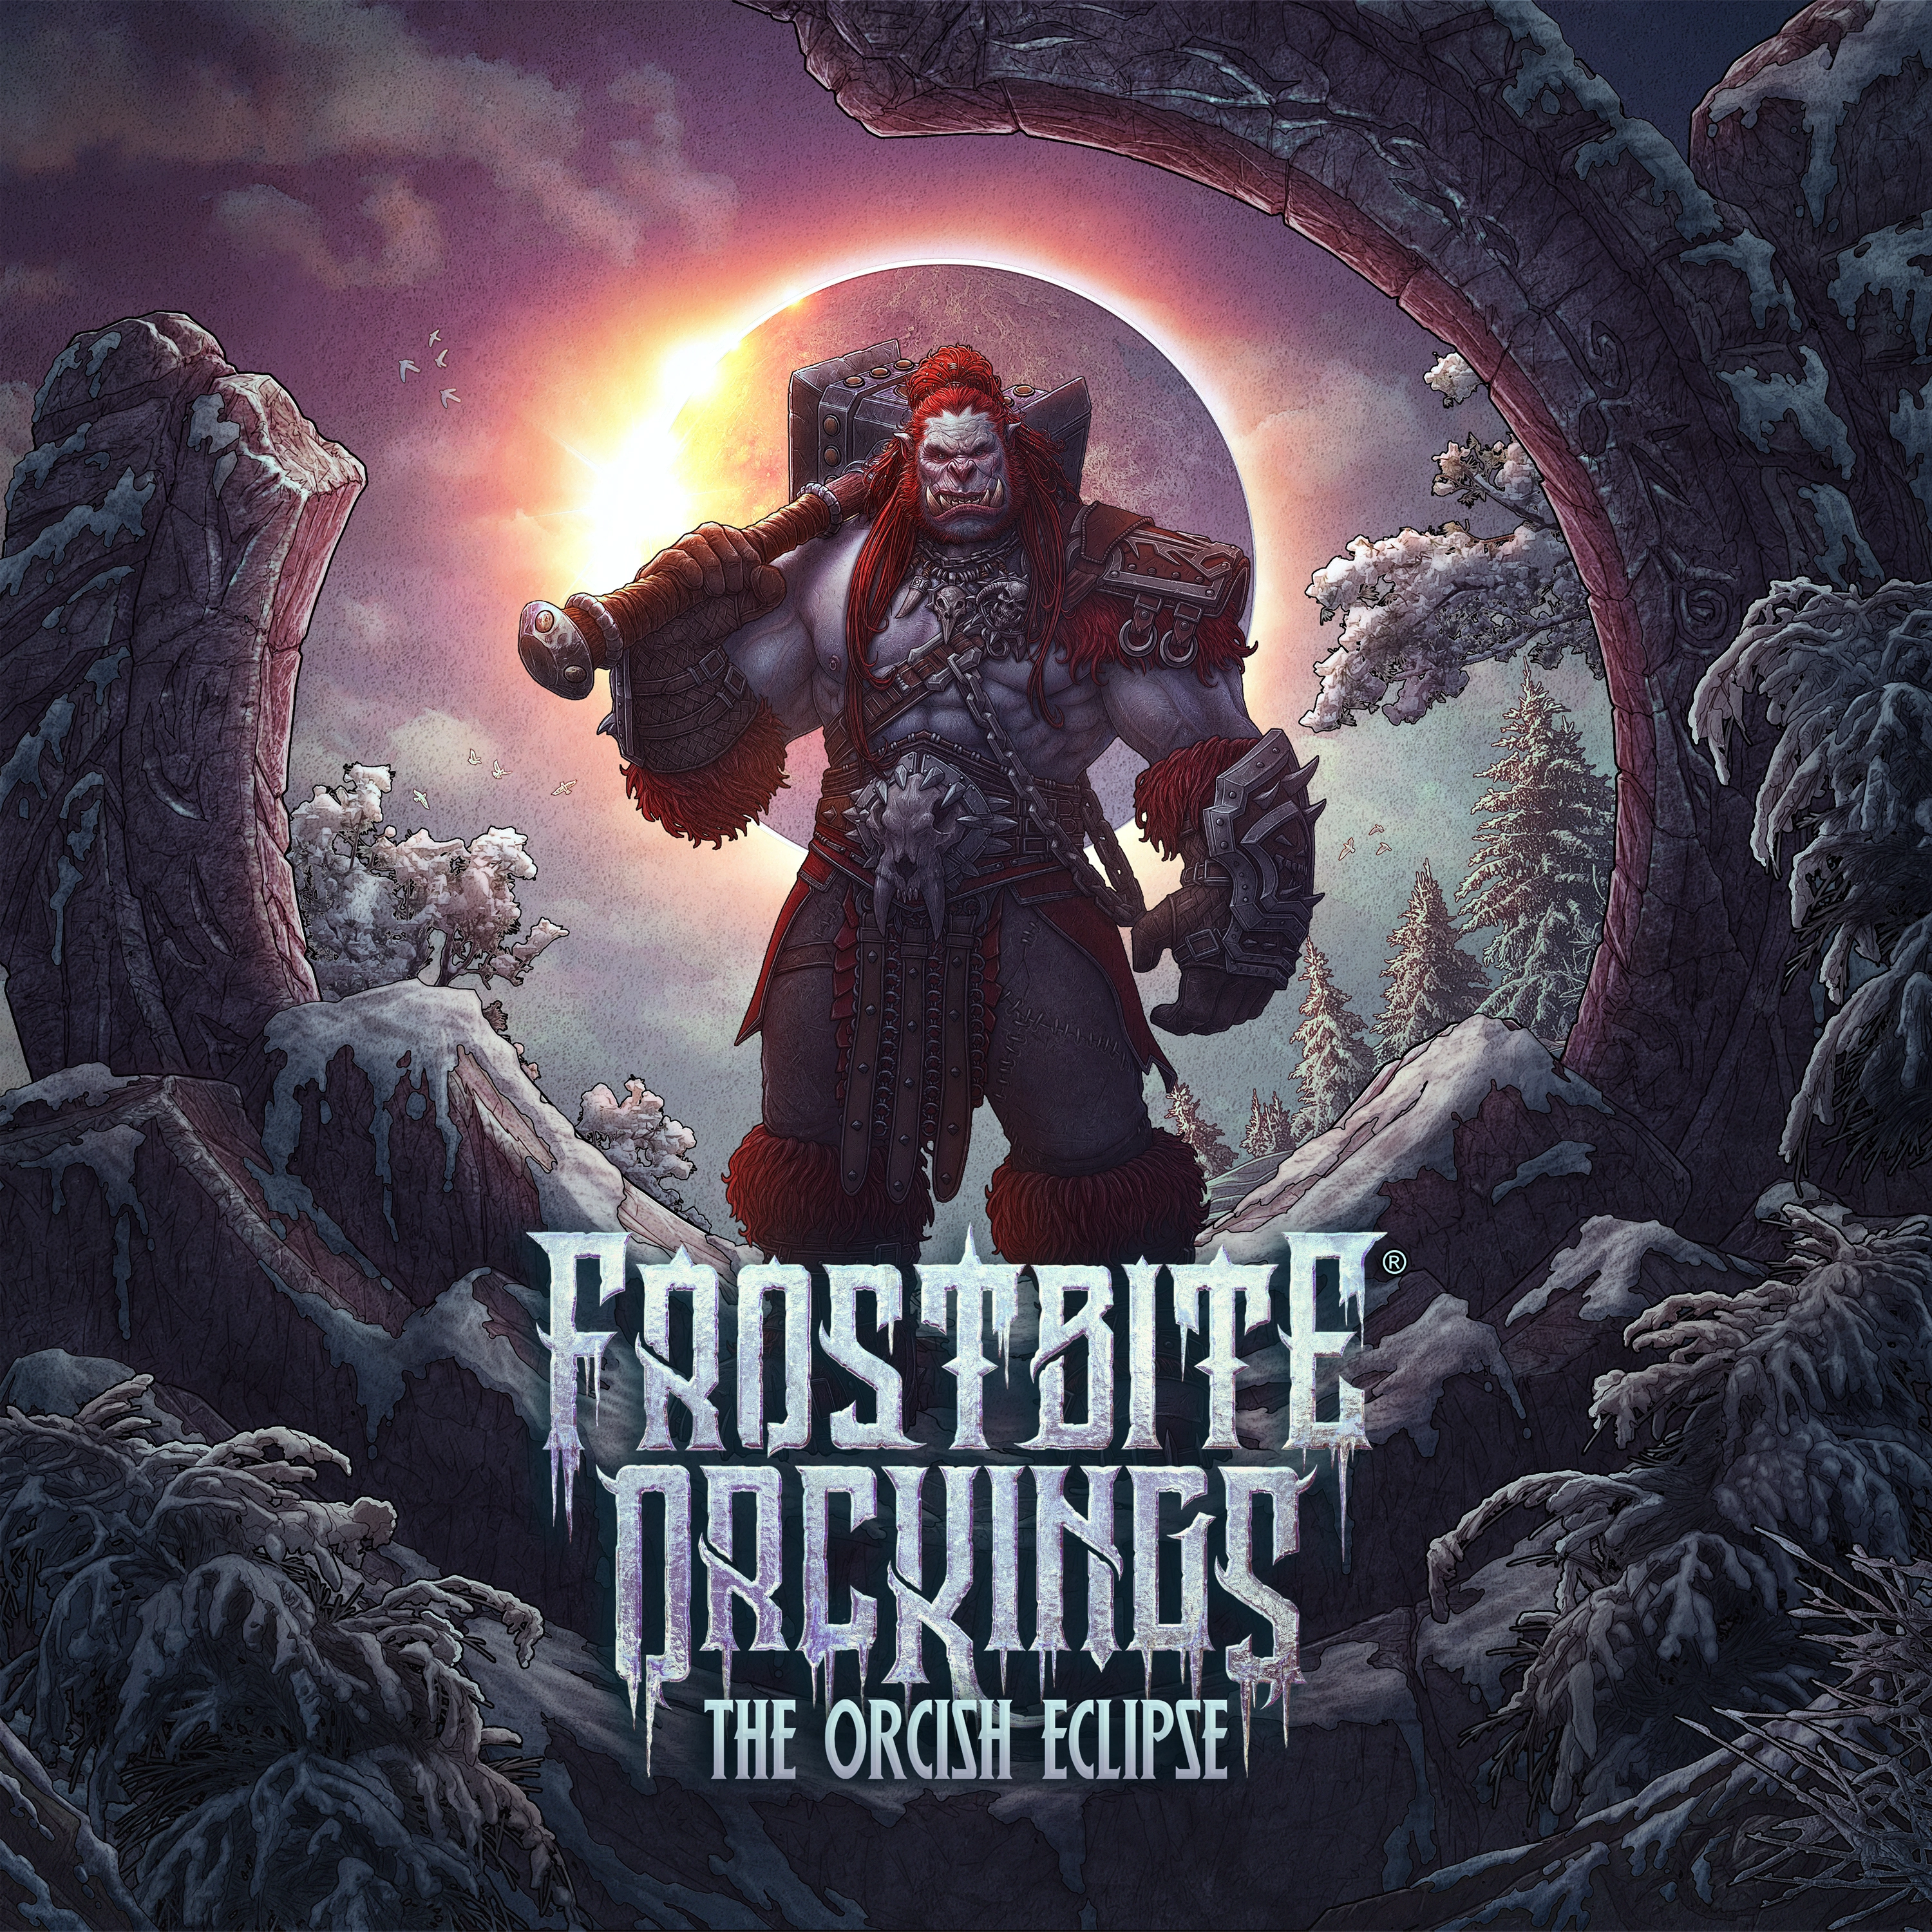 FROSTBITE ORCKINGS - The Orcish Eclipse [DIGIPAK CD]